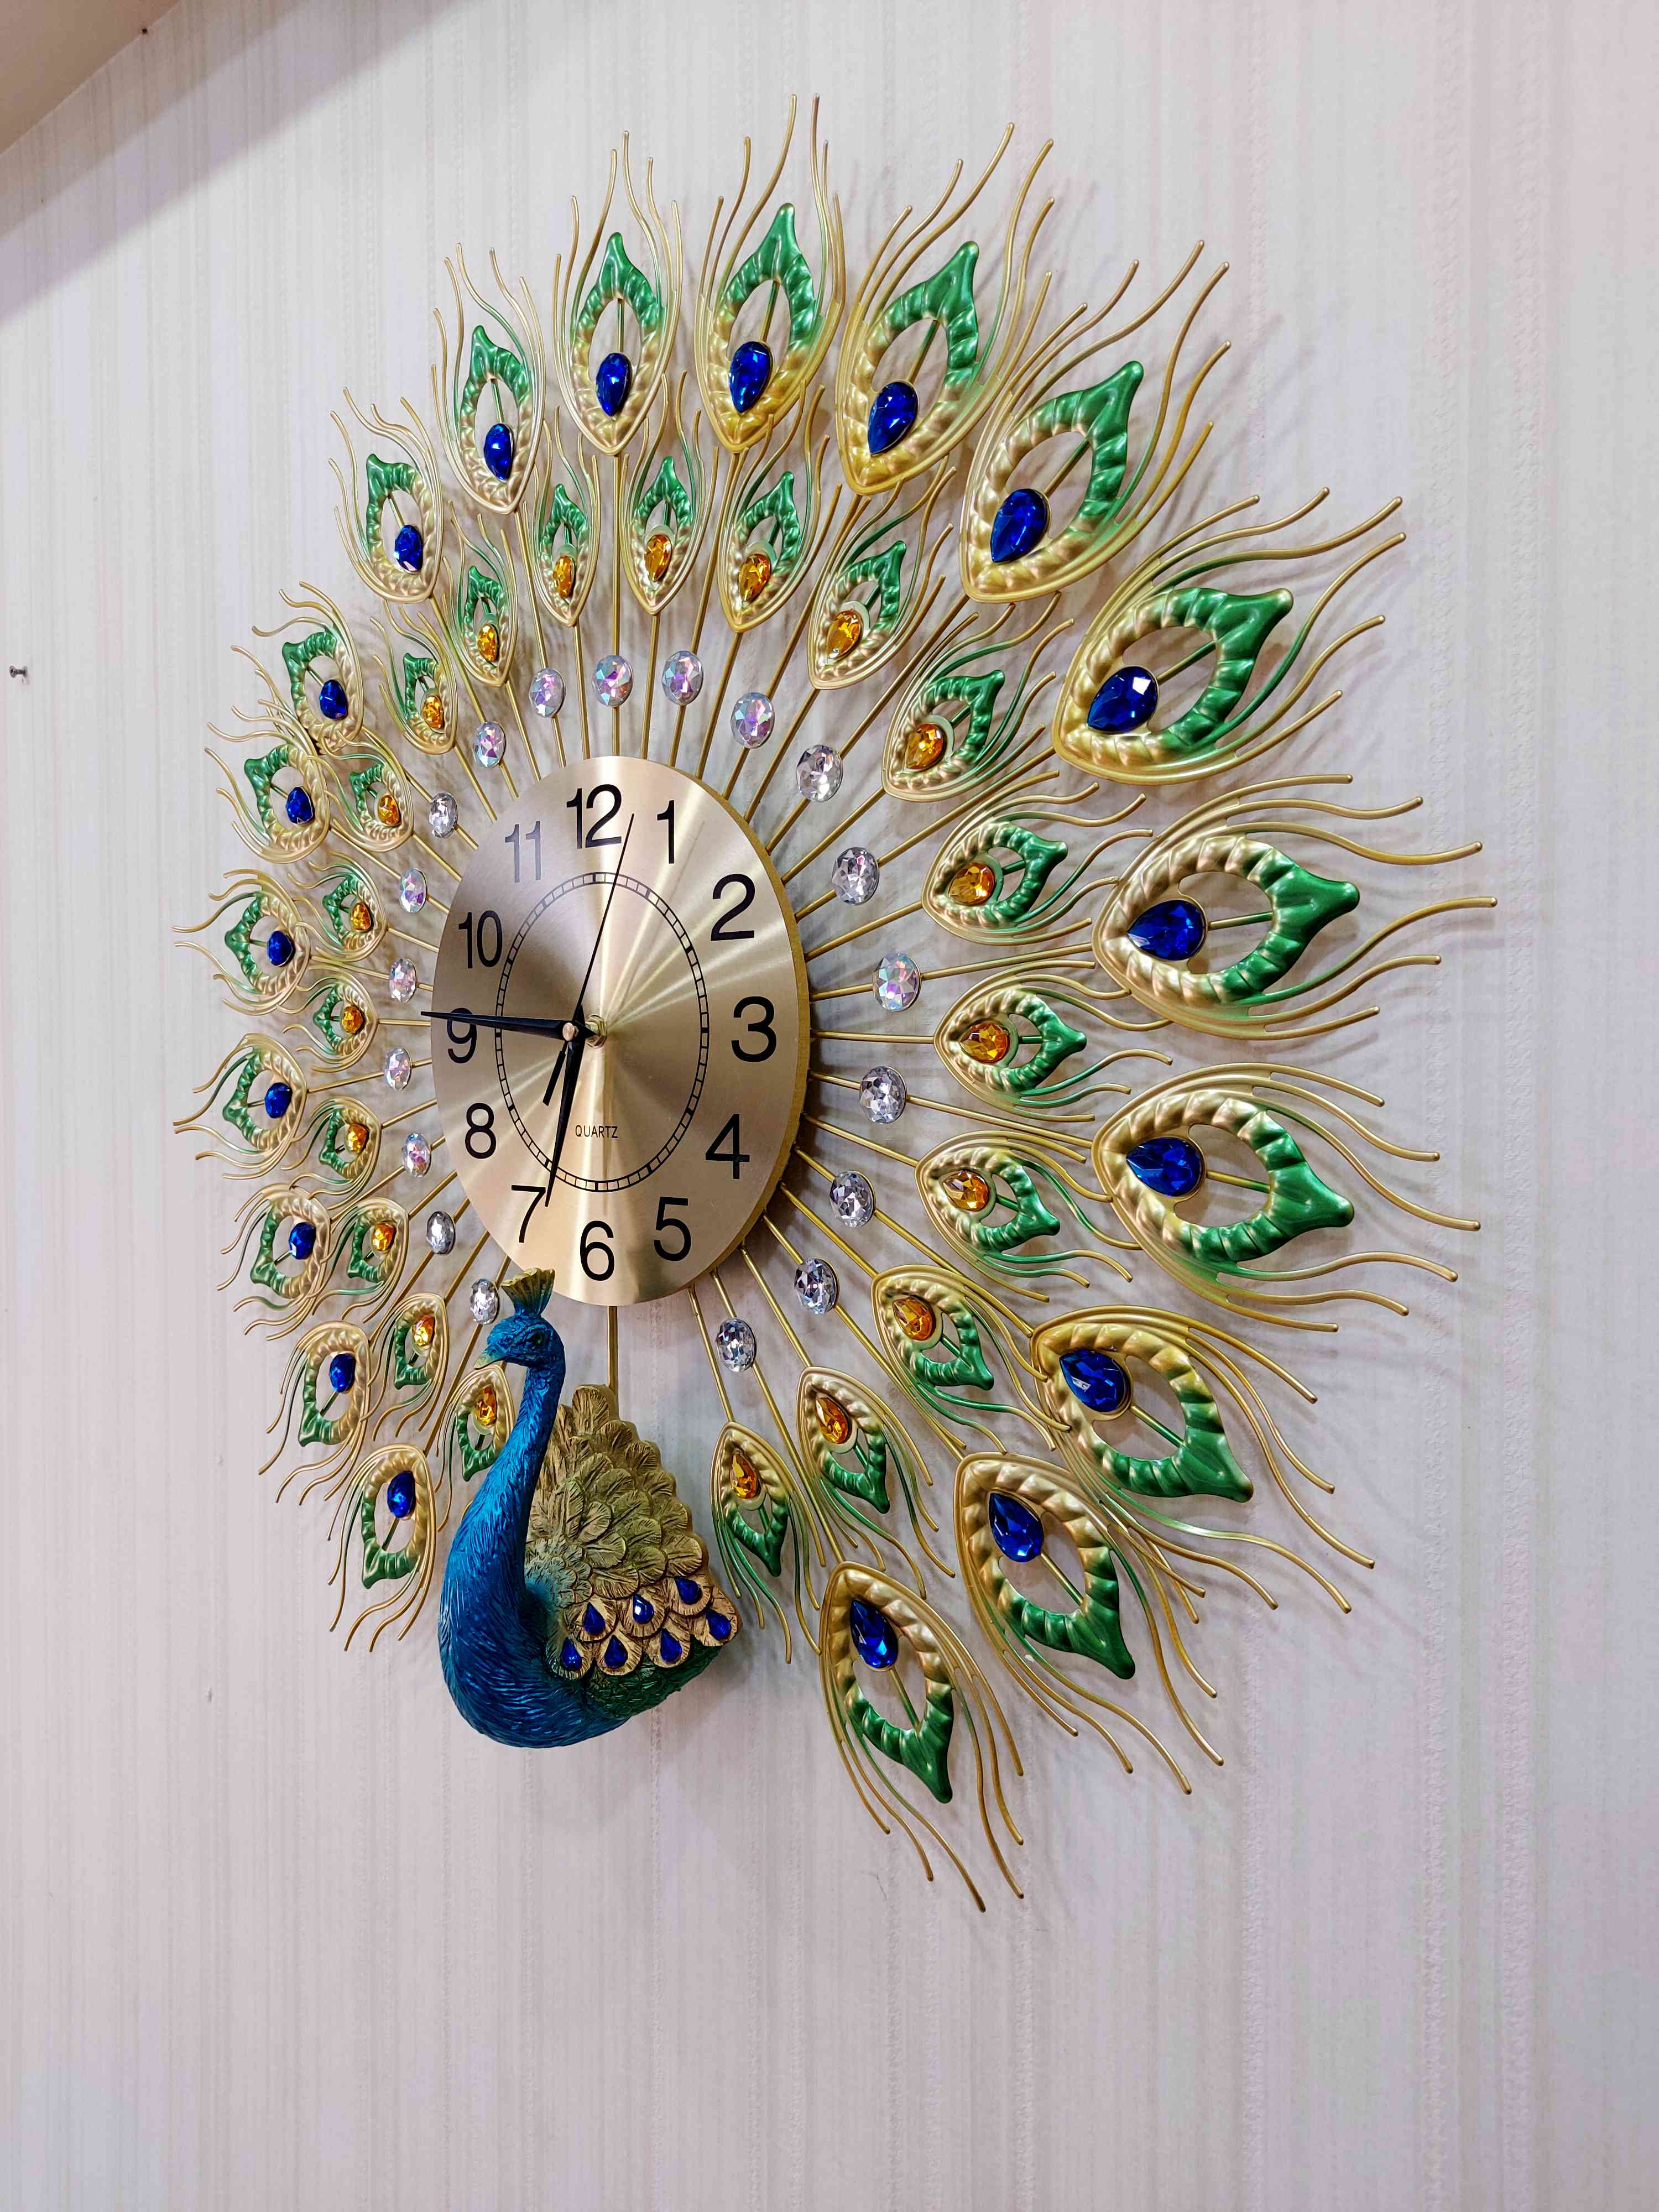 FunkyTradition 3D Peacock Feather Open Wall Clock, Wall Watch, Wall Decor for Home Office Decor and Gifts 60 CM Tall